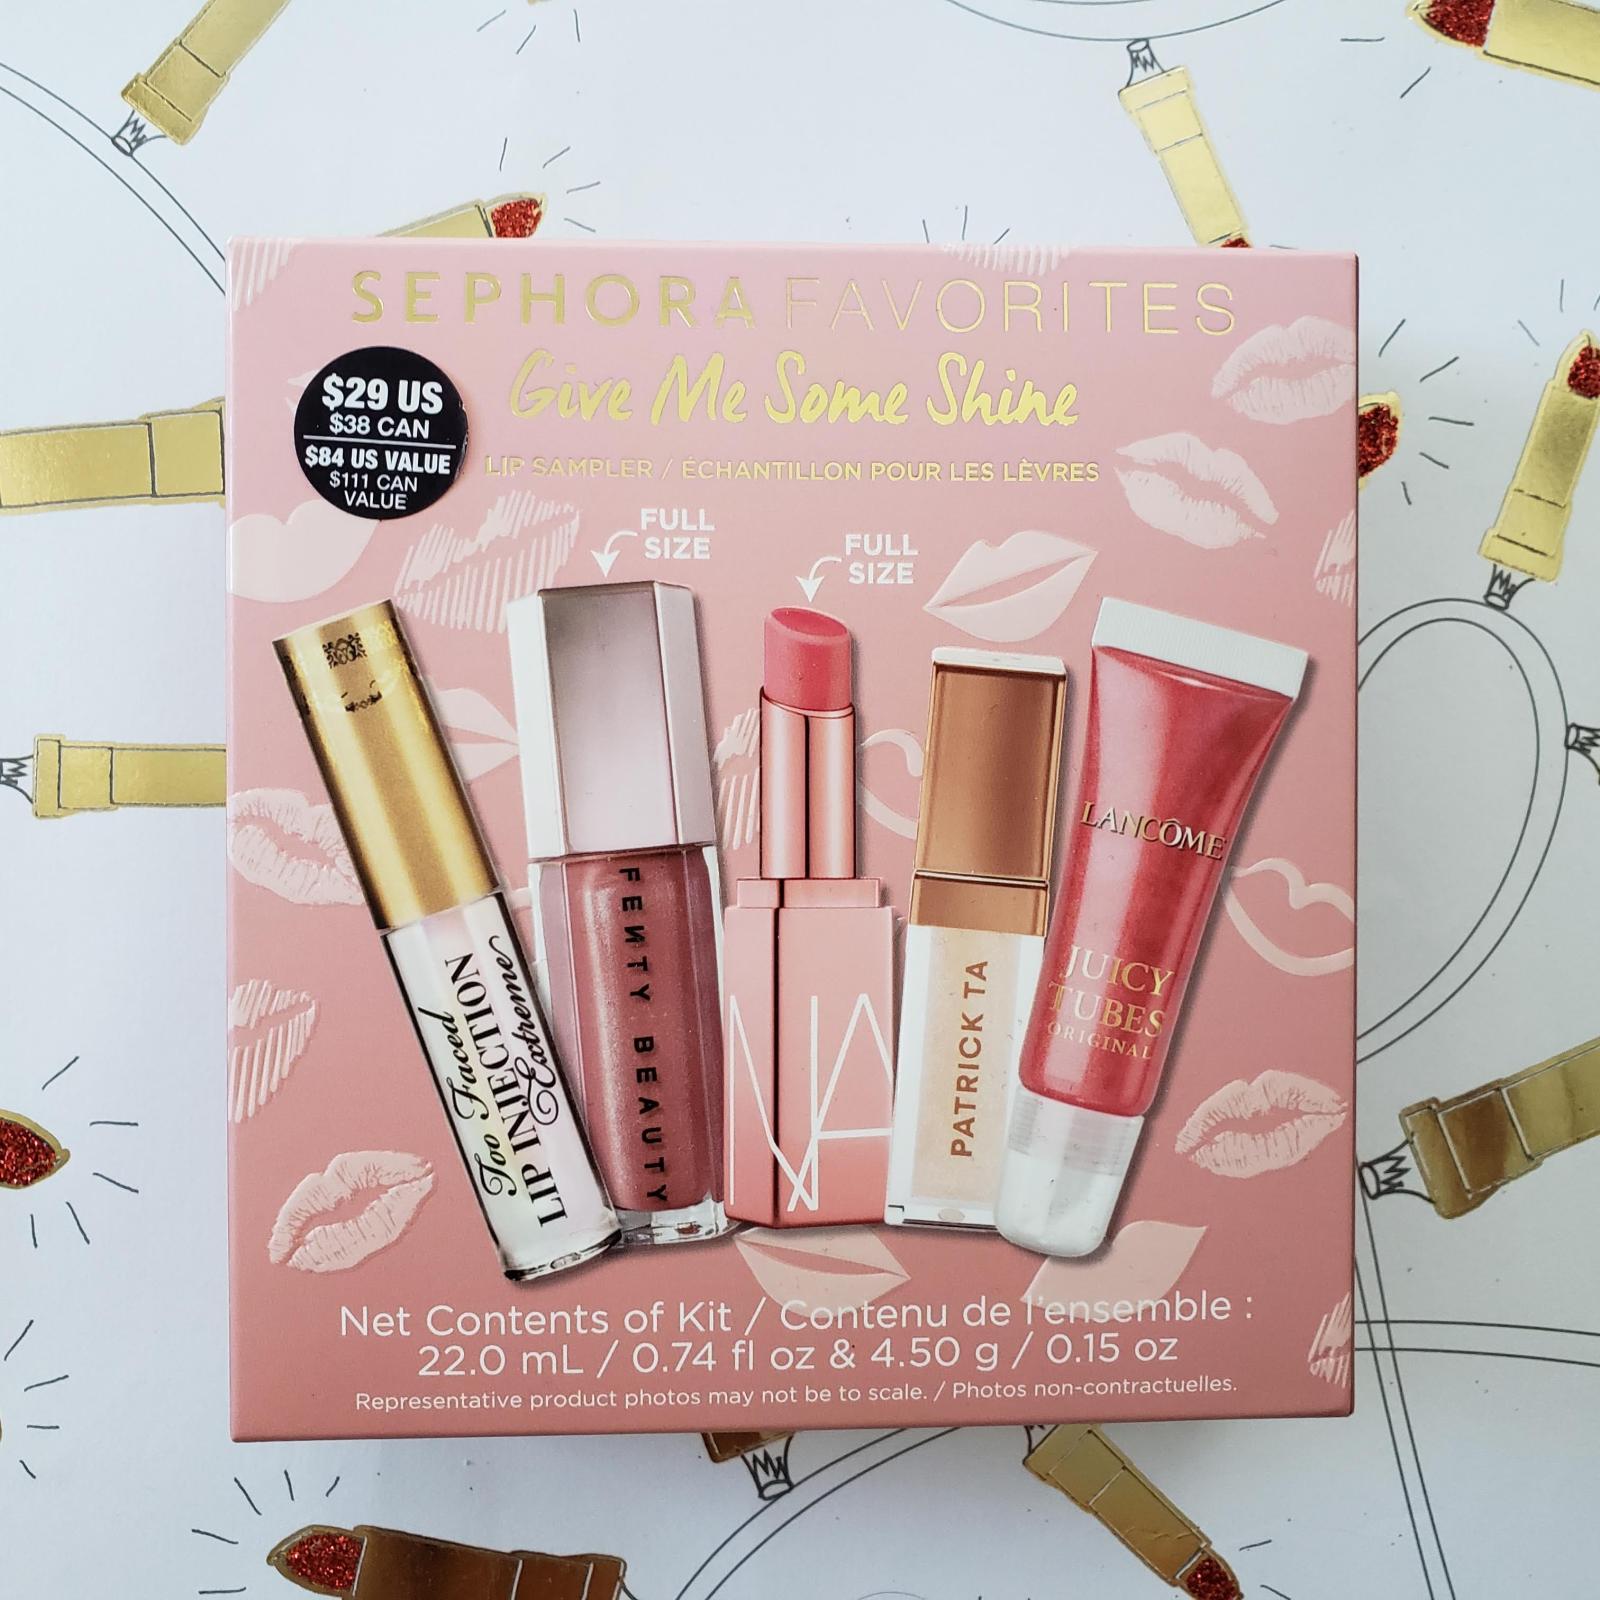 Sephora Favorites Give Me Some Shine Balm And Gloss Lip Set Review Front